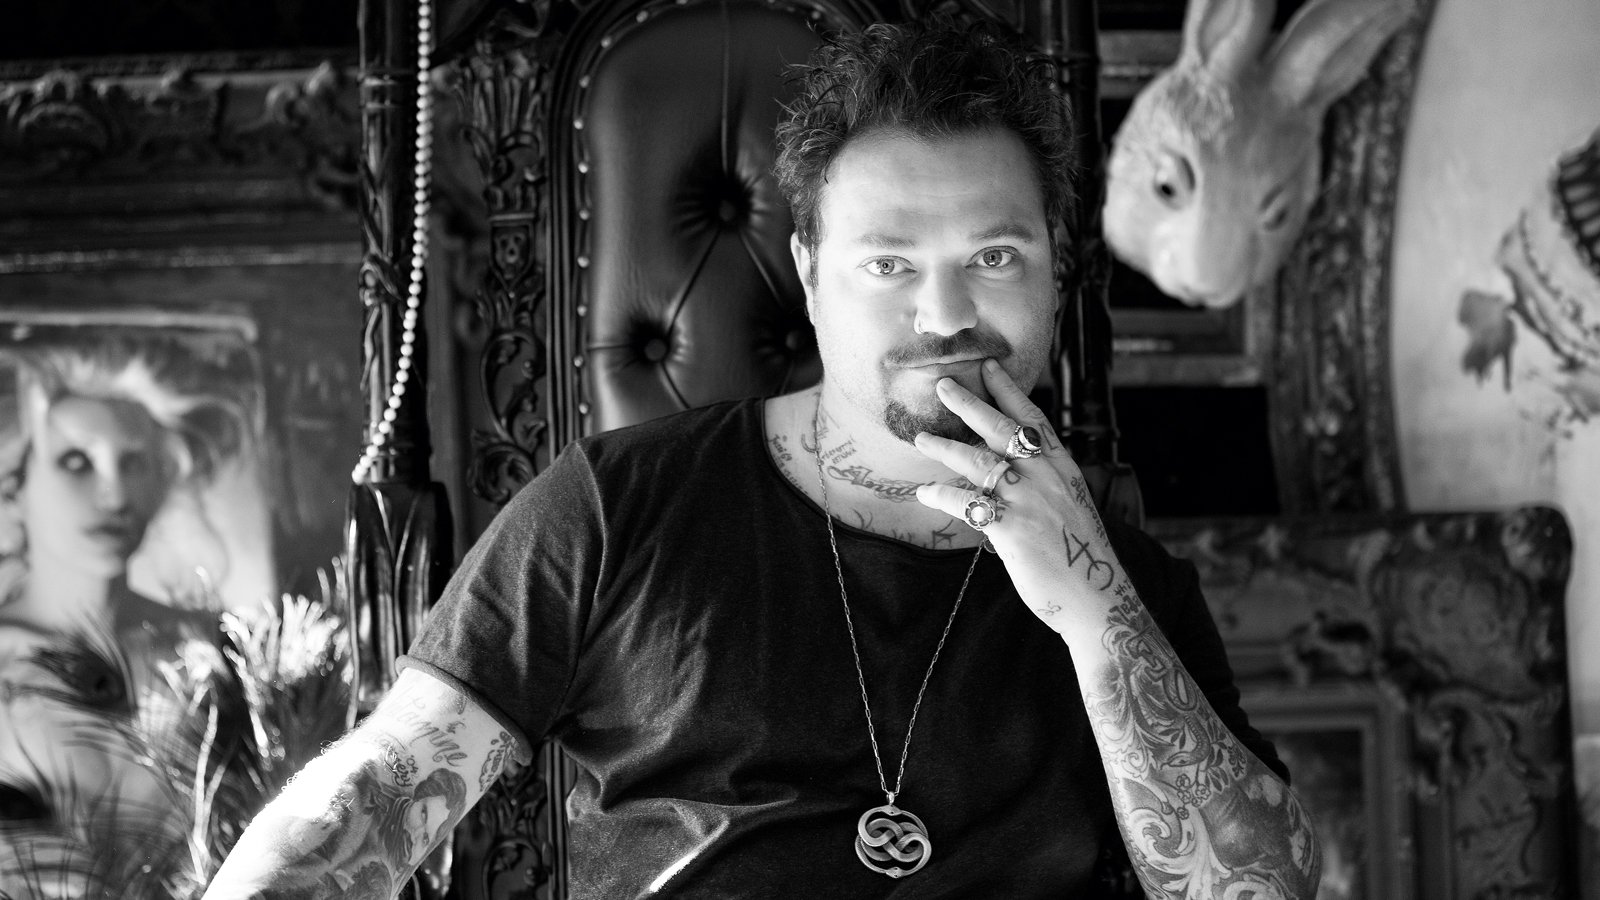 Bam Margera on Naked Stalkers, Bad Tattoos, Finding Sobriety After 'Jackass'